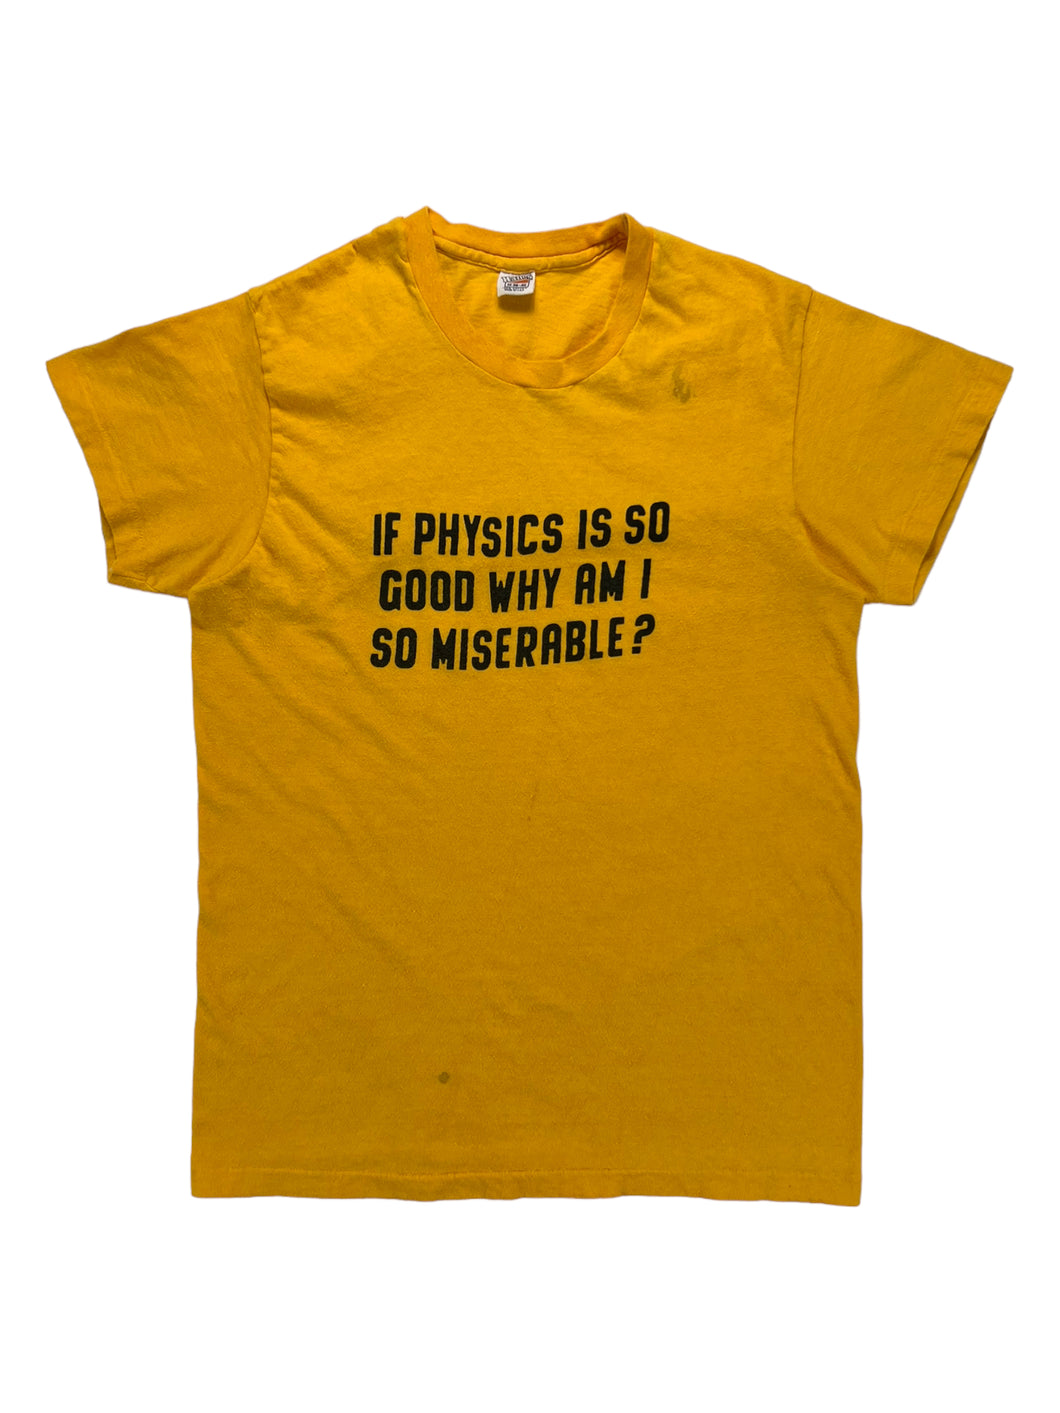 Vintage 70s Hanes IF PHYSICS IS SO GOD WHY AM I SO MISERABLE? faded tee (S/M)